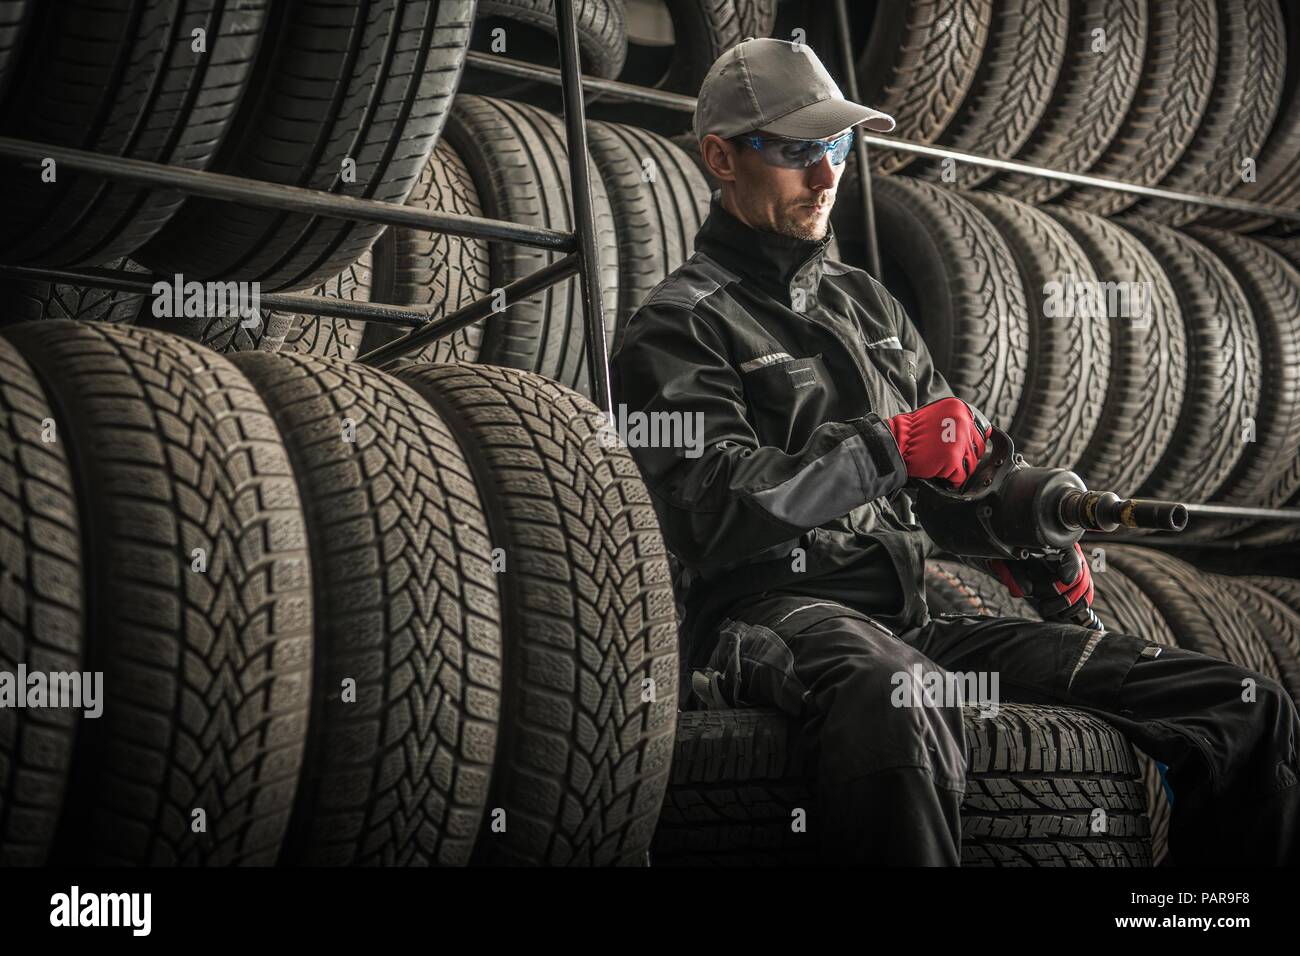 Car Tires Sales and Repair. Service Worker with Power Tool Between New and Used Tires. Automotive Theme. Seasonal Vehicle Tires Changes. Stock Photo